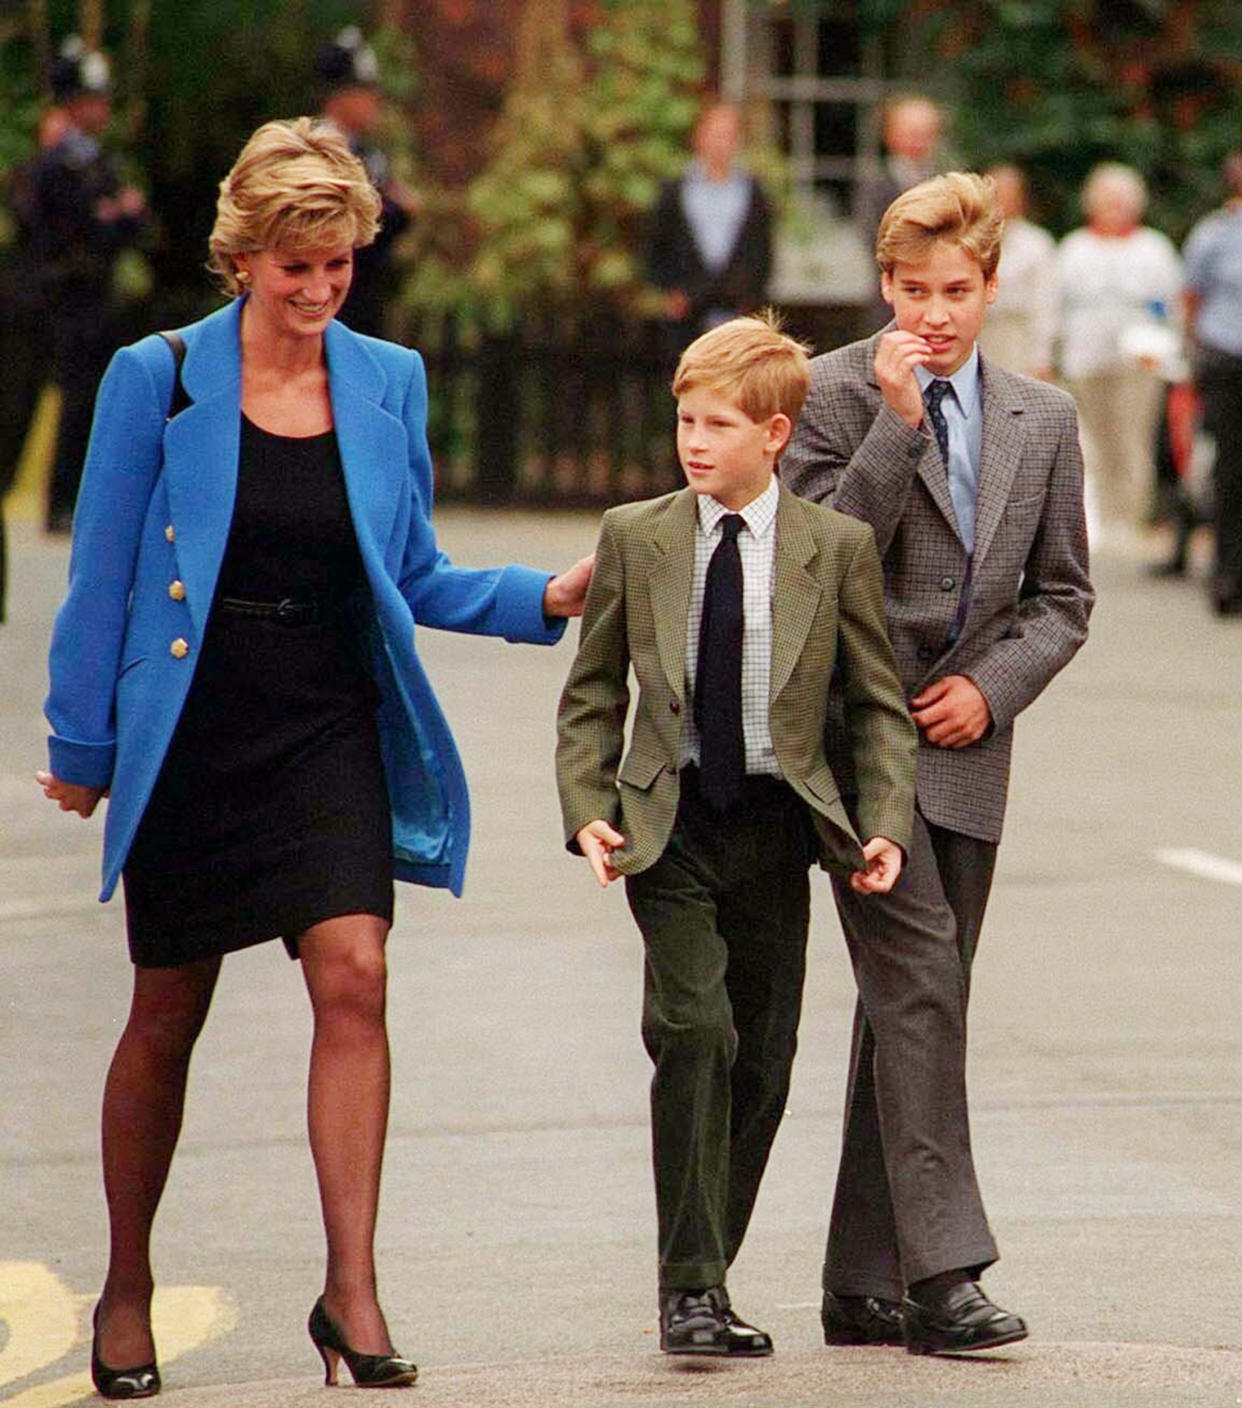 Prince William arrives with Diana, Princess of Wales and Prince Harry (Anwar Hussein / Getty Images)